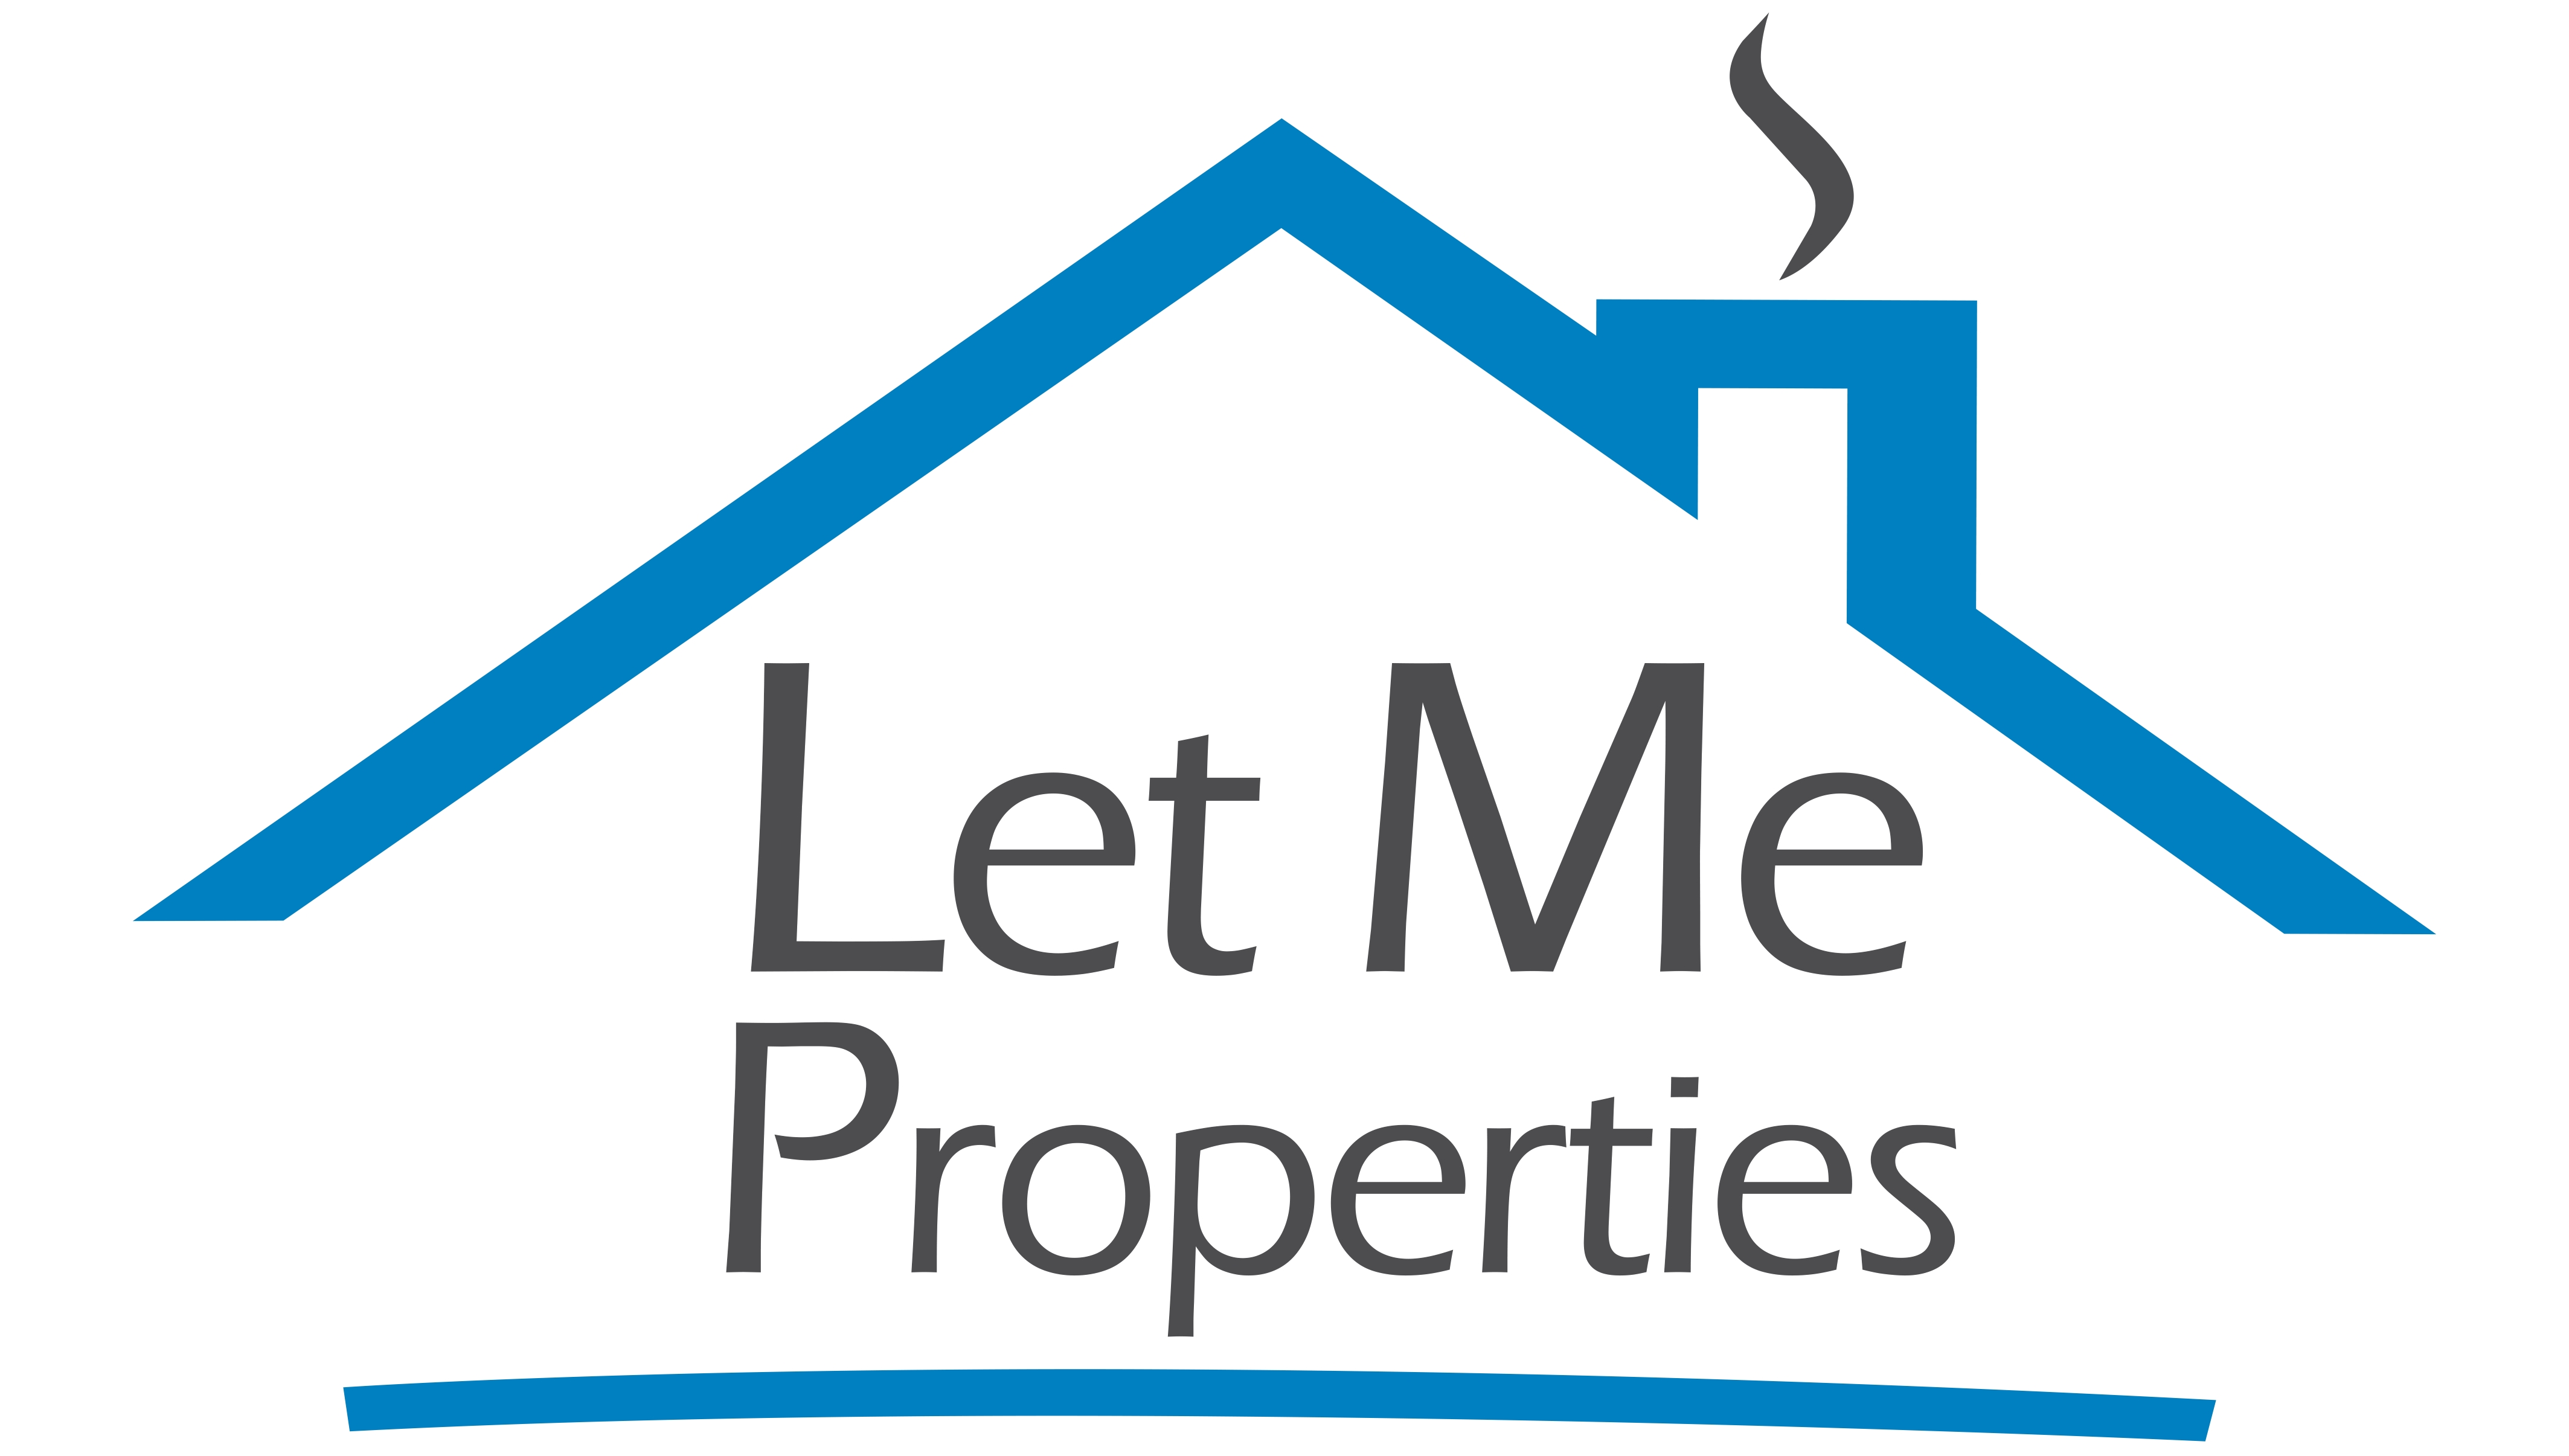 Let Me Properties : Letting agents in Borehamwood Hertfordshire